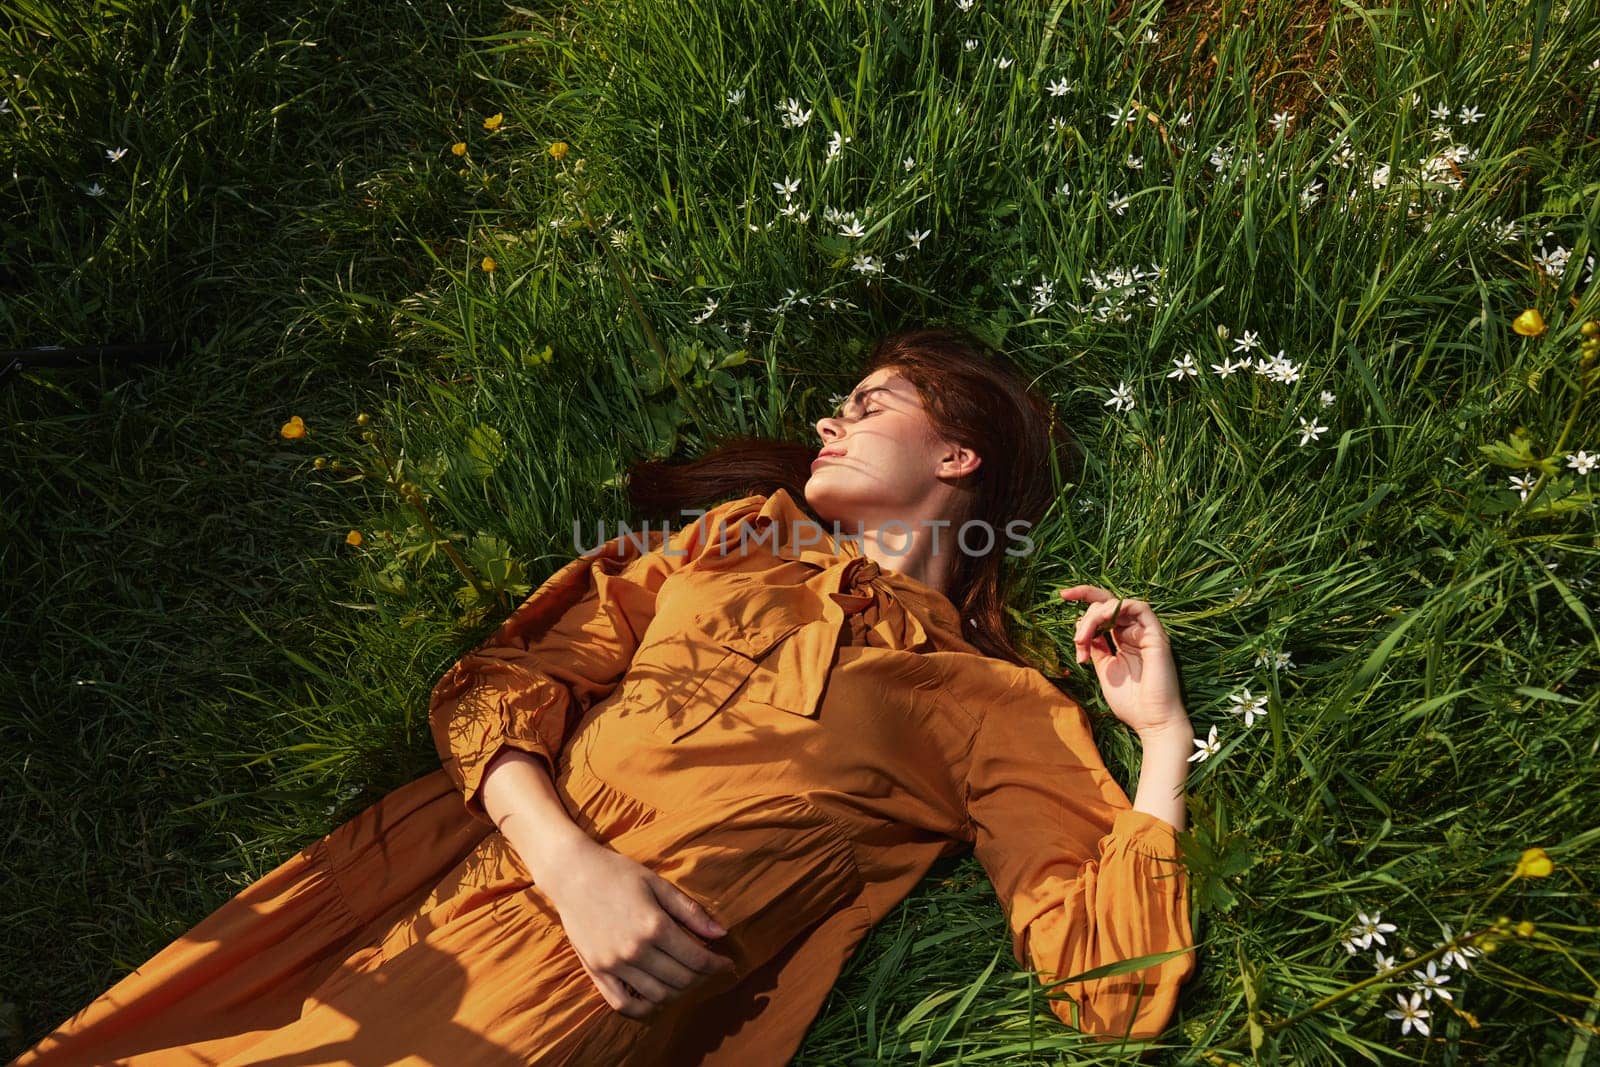 a calm woman with long red hair lies in a green field with yellow flowers, in an orange dress with her eyes closed, with a pleasant smile on her face, enjoying peace and recuperating, illuminated by the setting sun. High quality photo